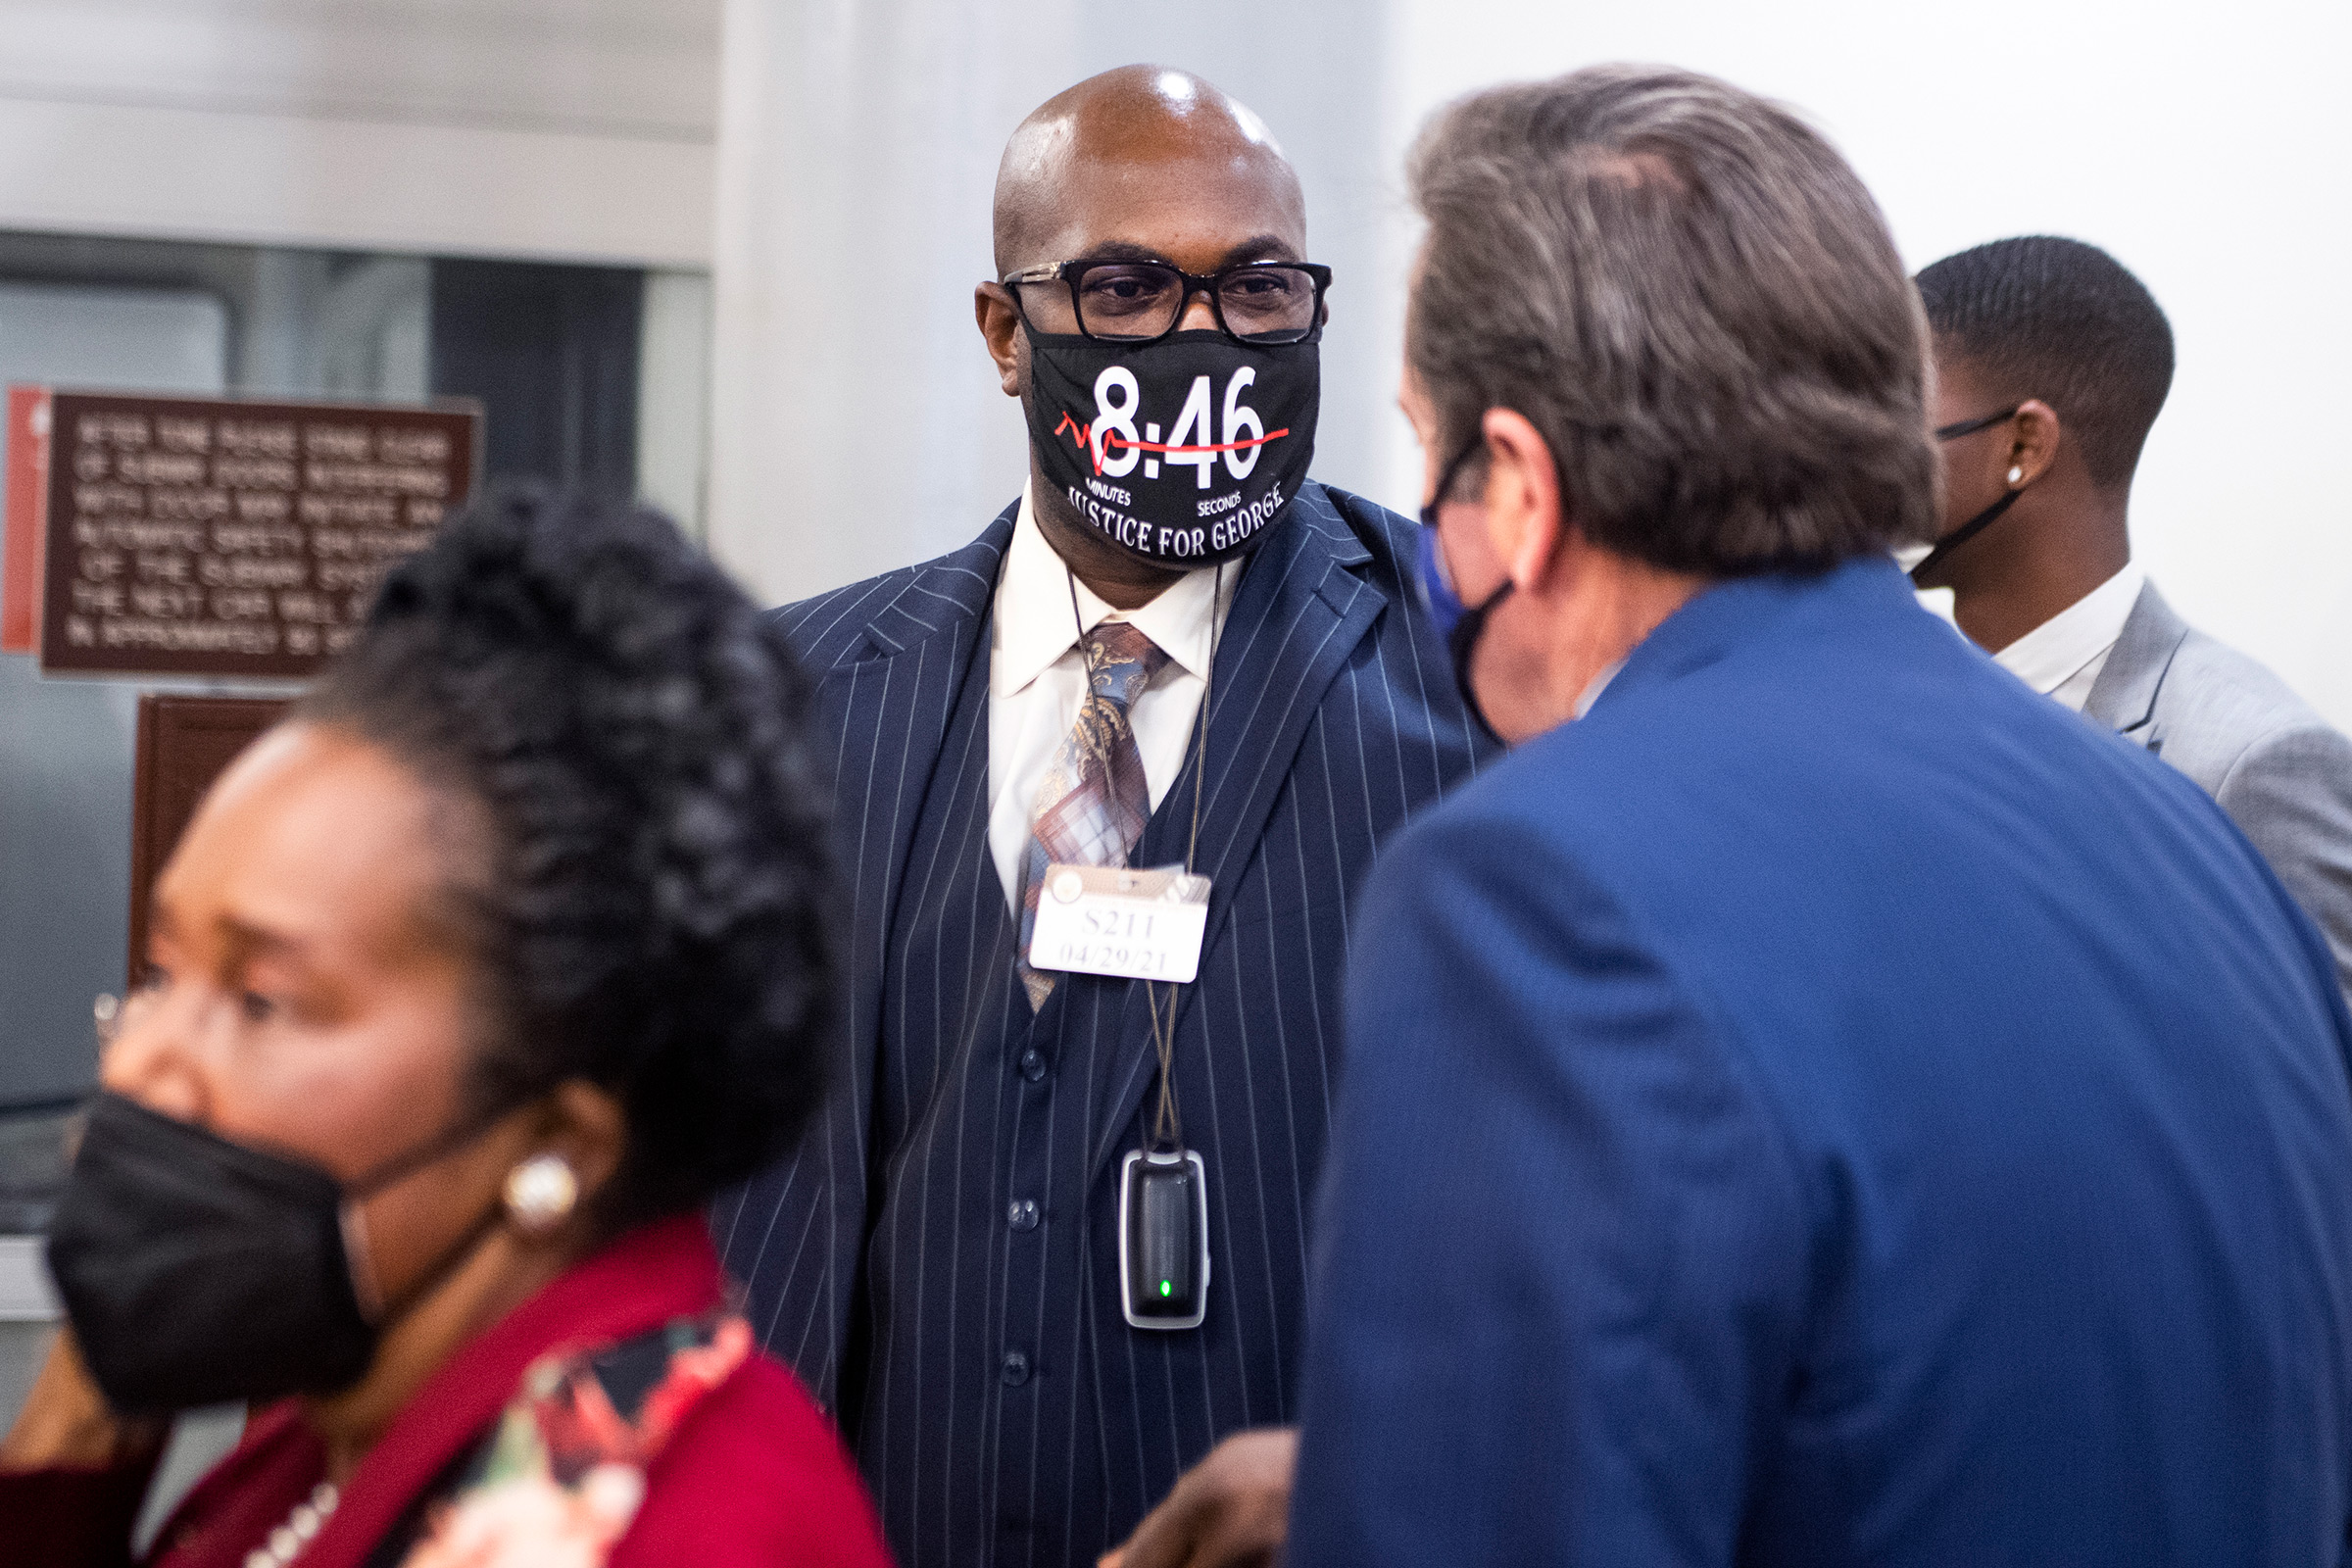 Philonise Floyd, center, the brother of George Floyd, talks with Rep. John Garamendi, D-Calif., while visiting Capitol Hill to discuss the George Floyd Justice in Policing Act, in Washington, D.C., on April 29, 2021. (Tom Williams—CQ-Roll Call, Inc./Getty Images)